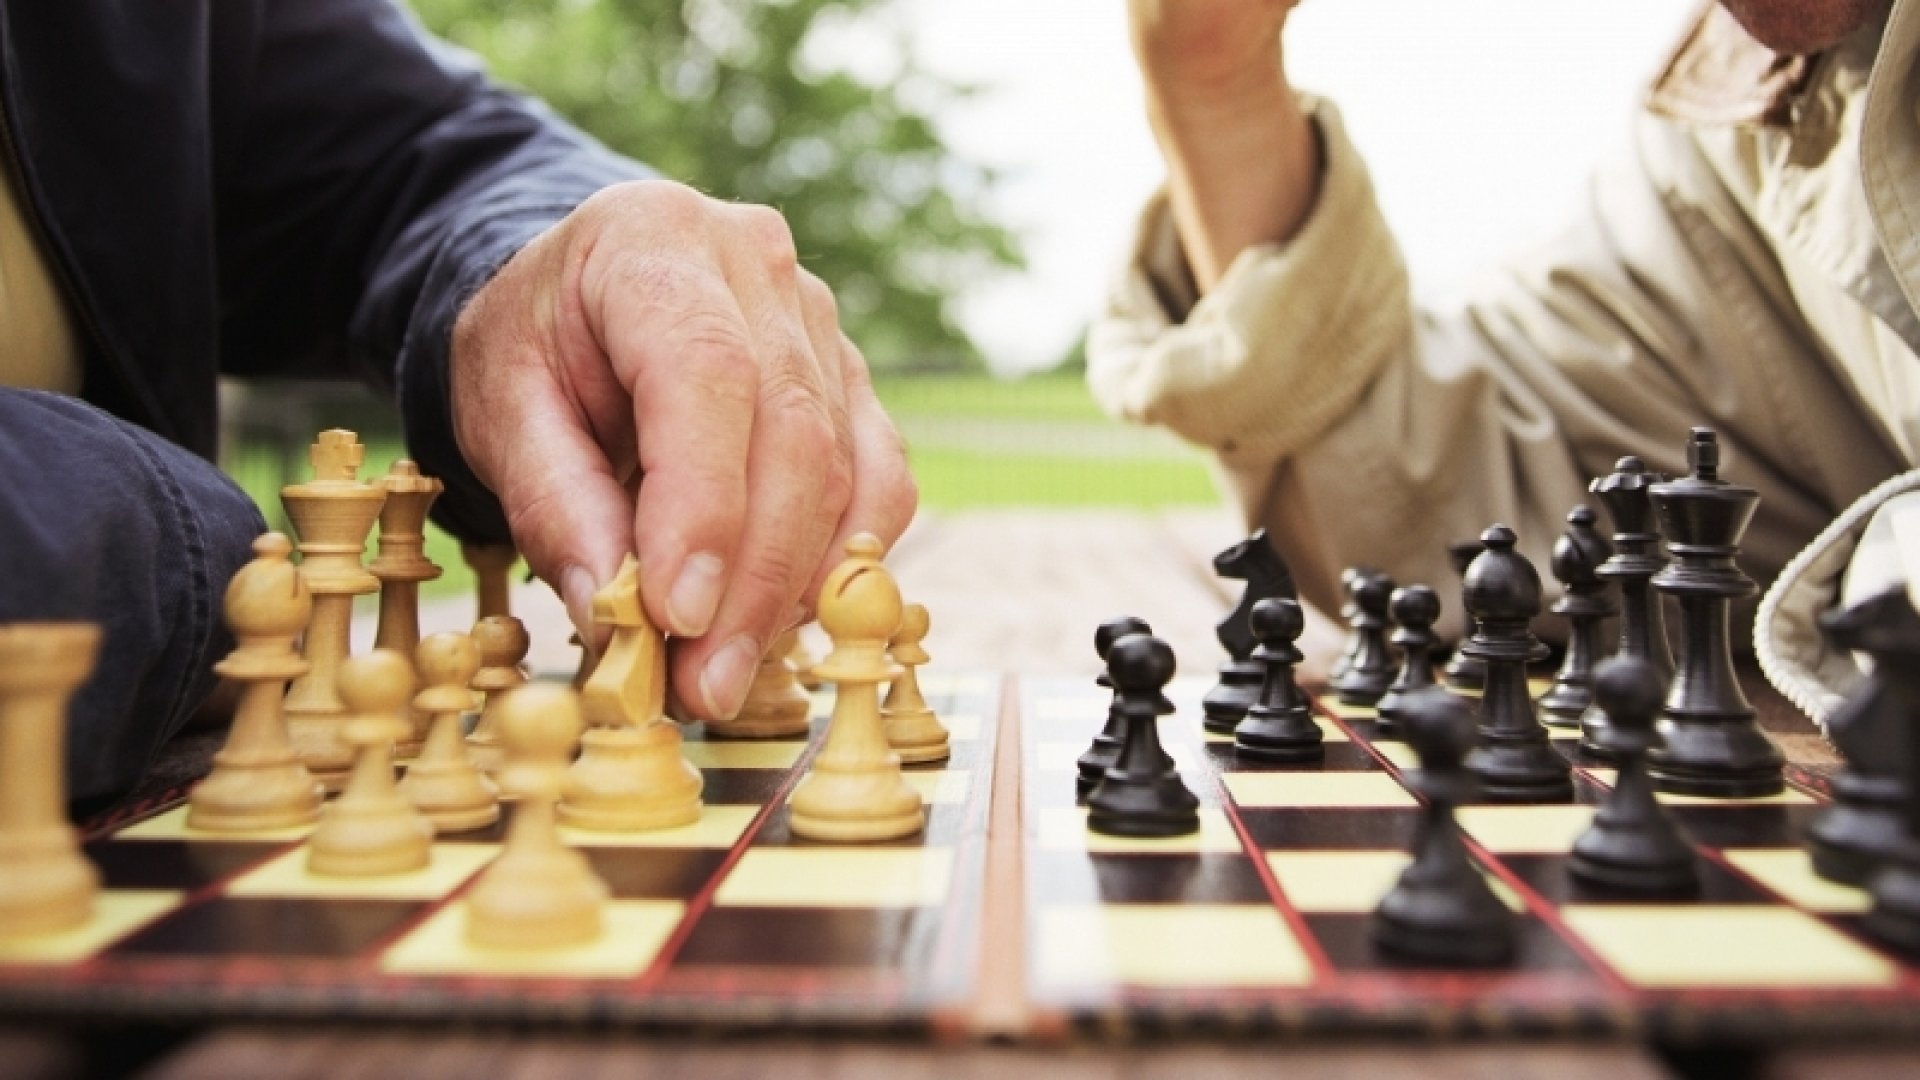 19 Astounding Facts About Chess 